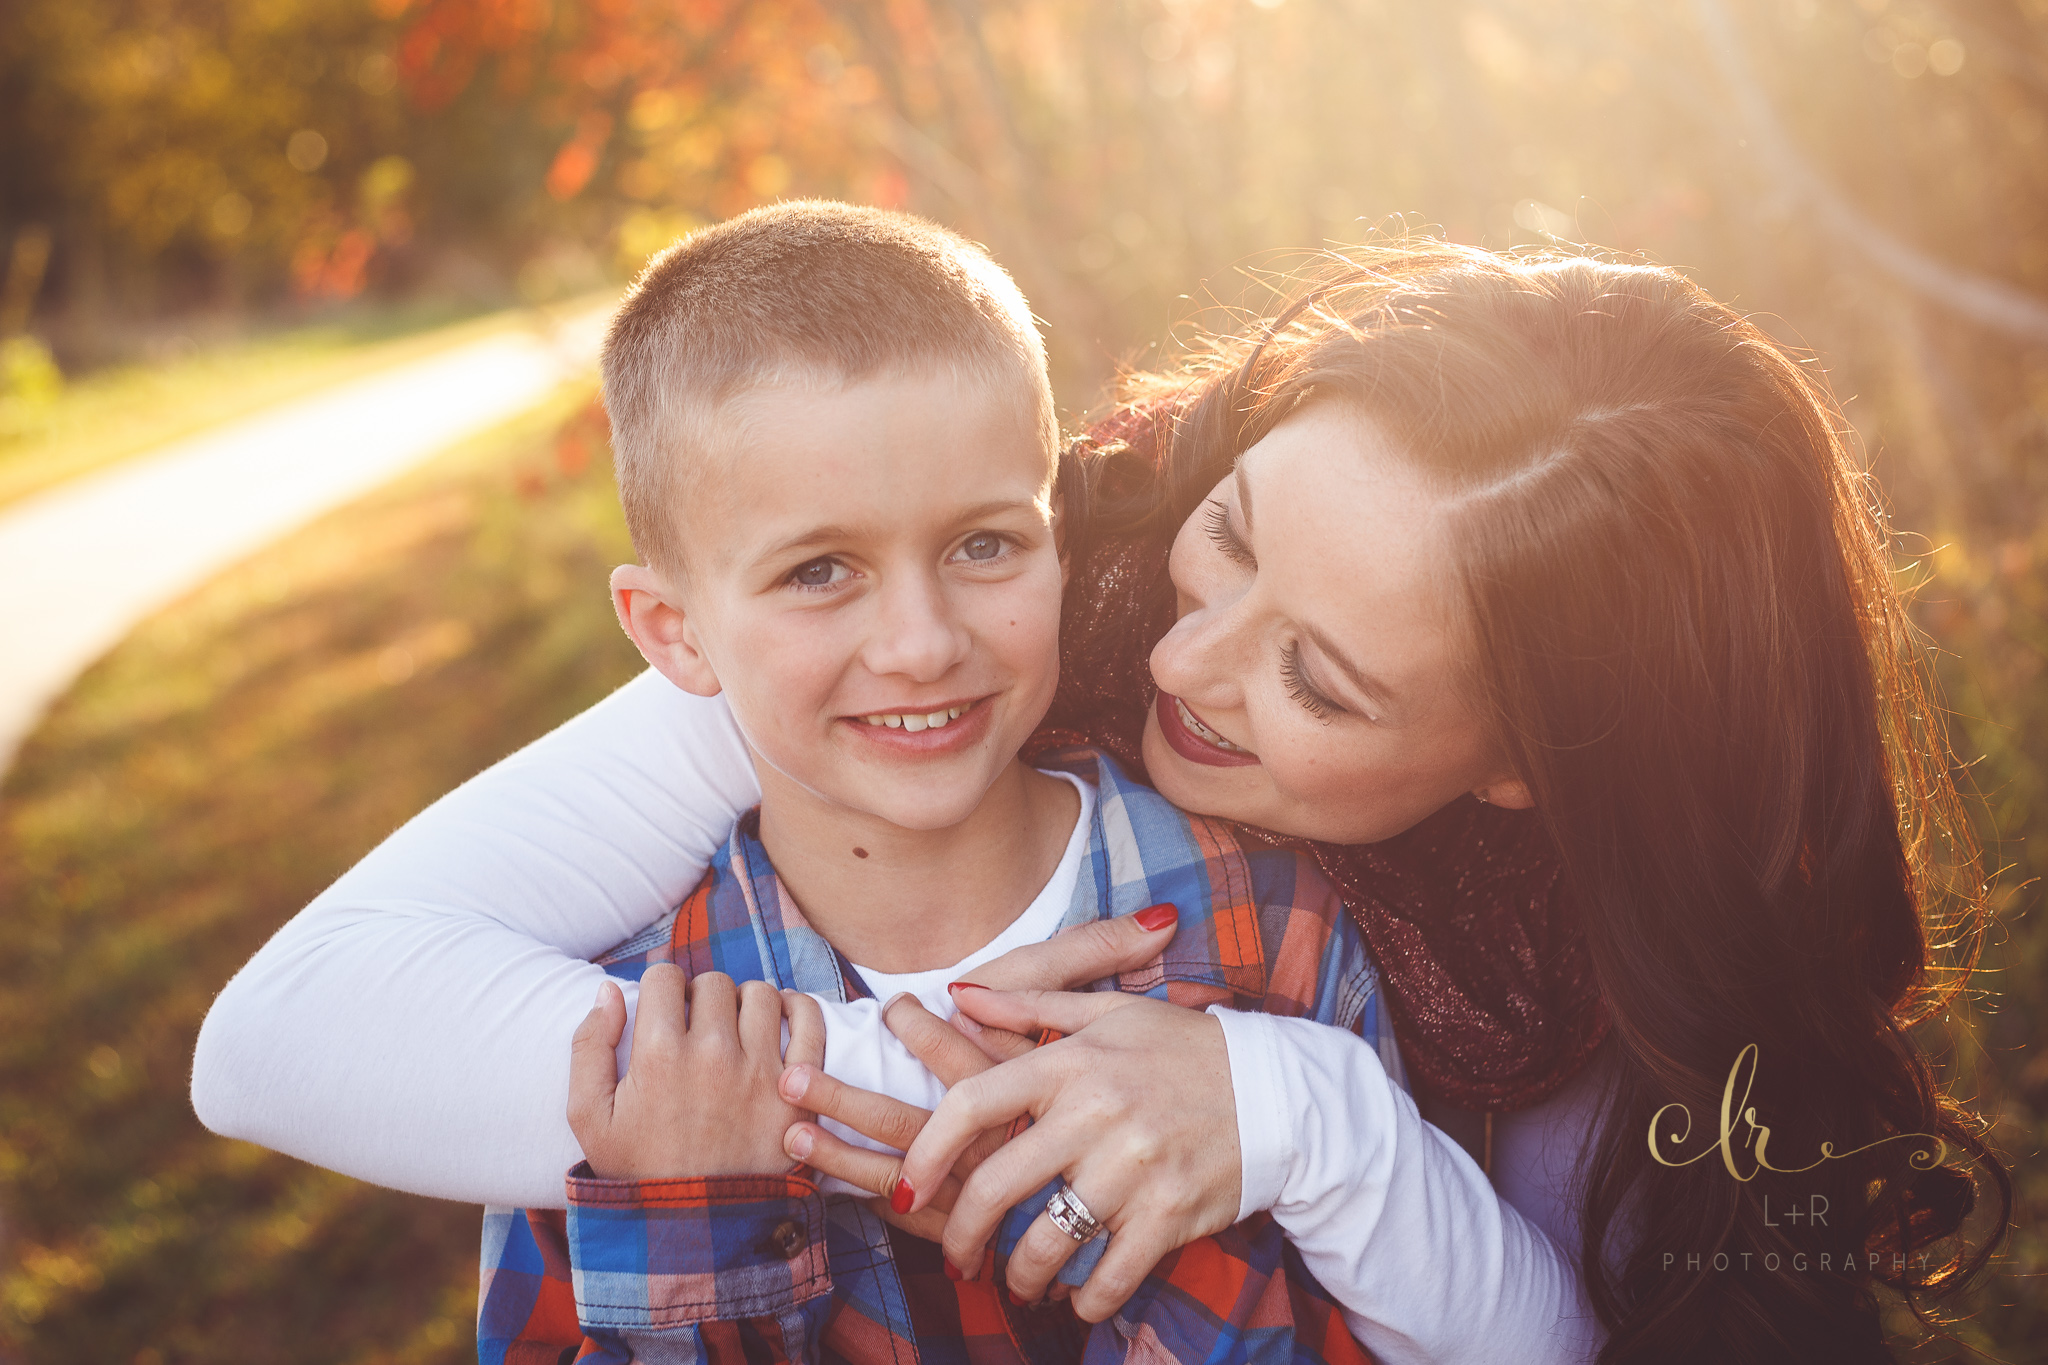 A photograph of a mother embracing her young son in the golden sunset, in an autumn family photography by L&R Photography